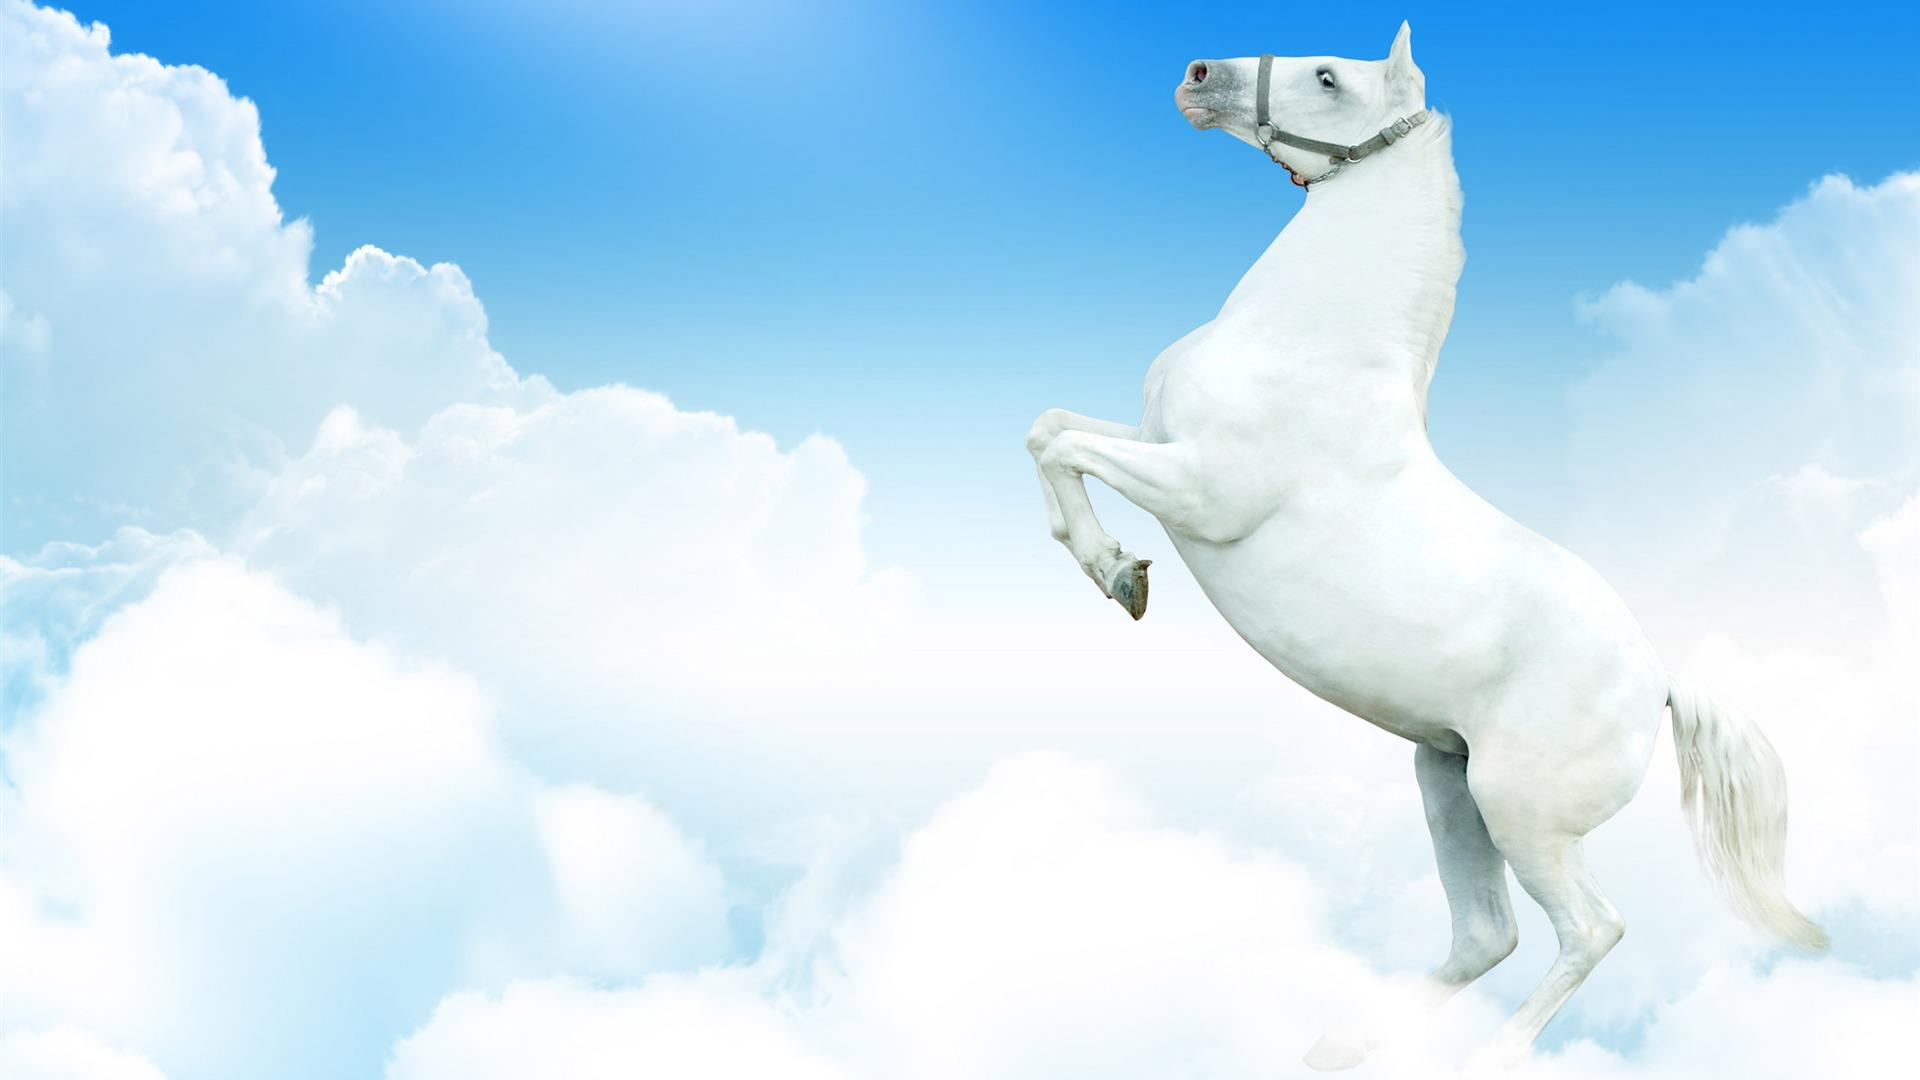 White Horse Wallpaper Pictures Image